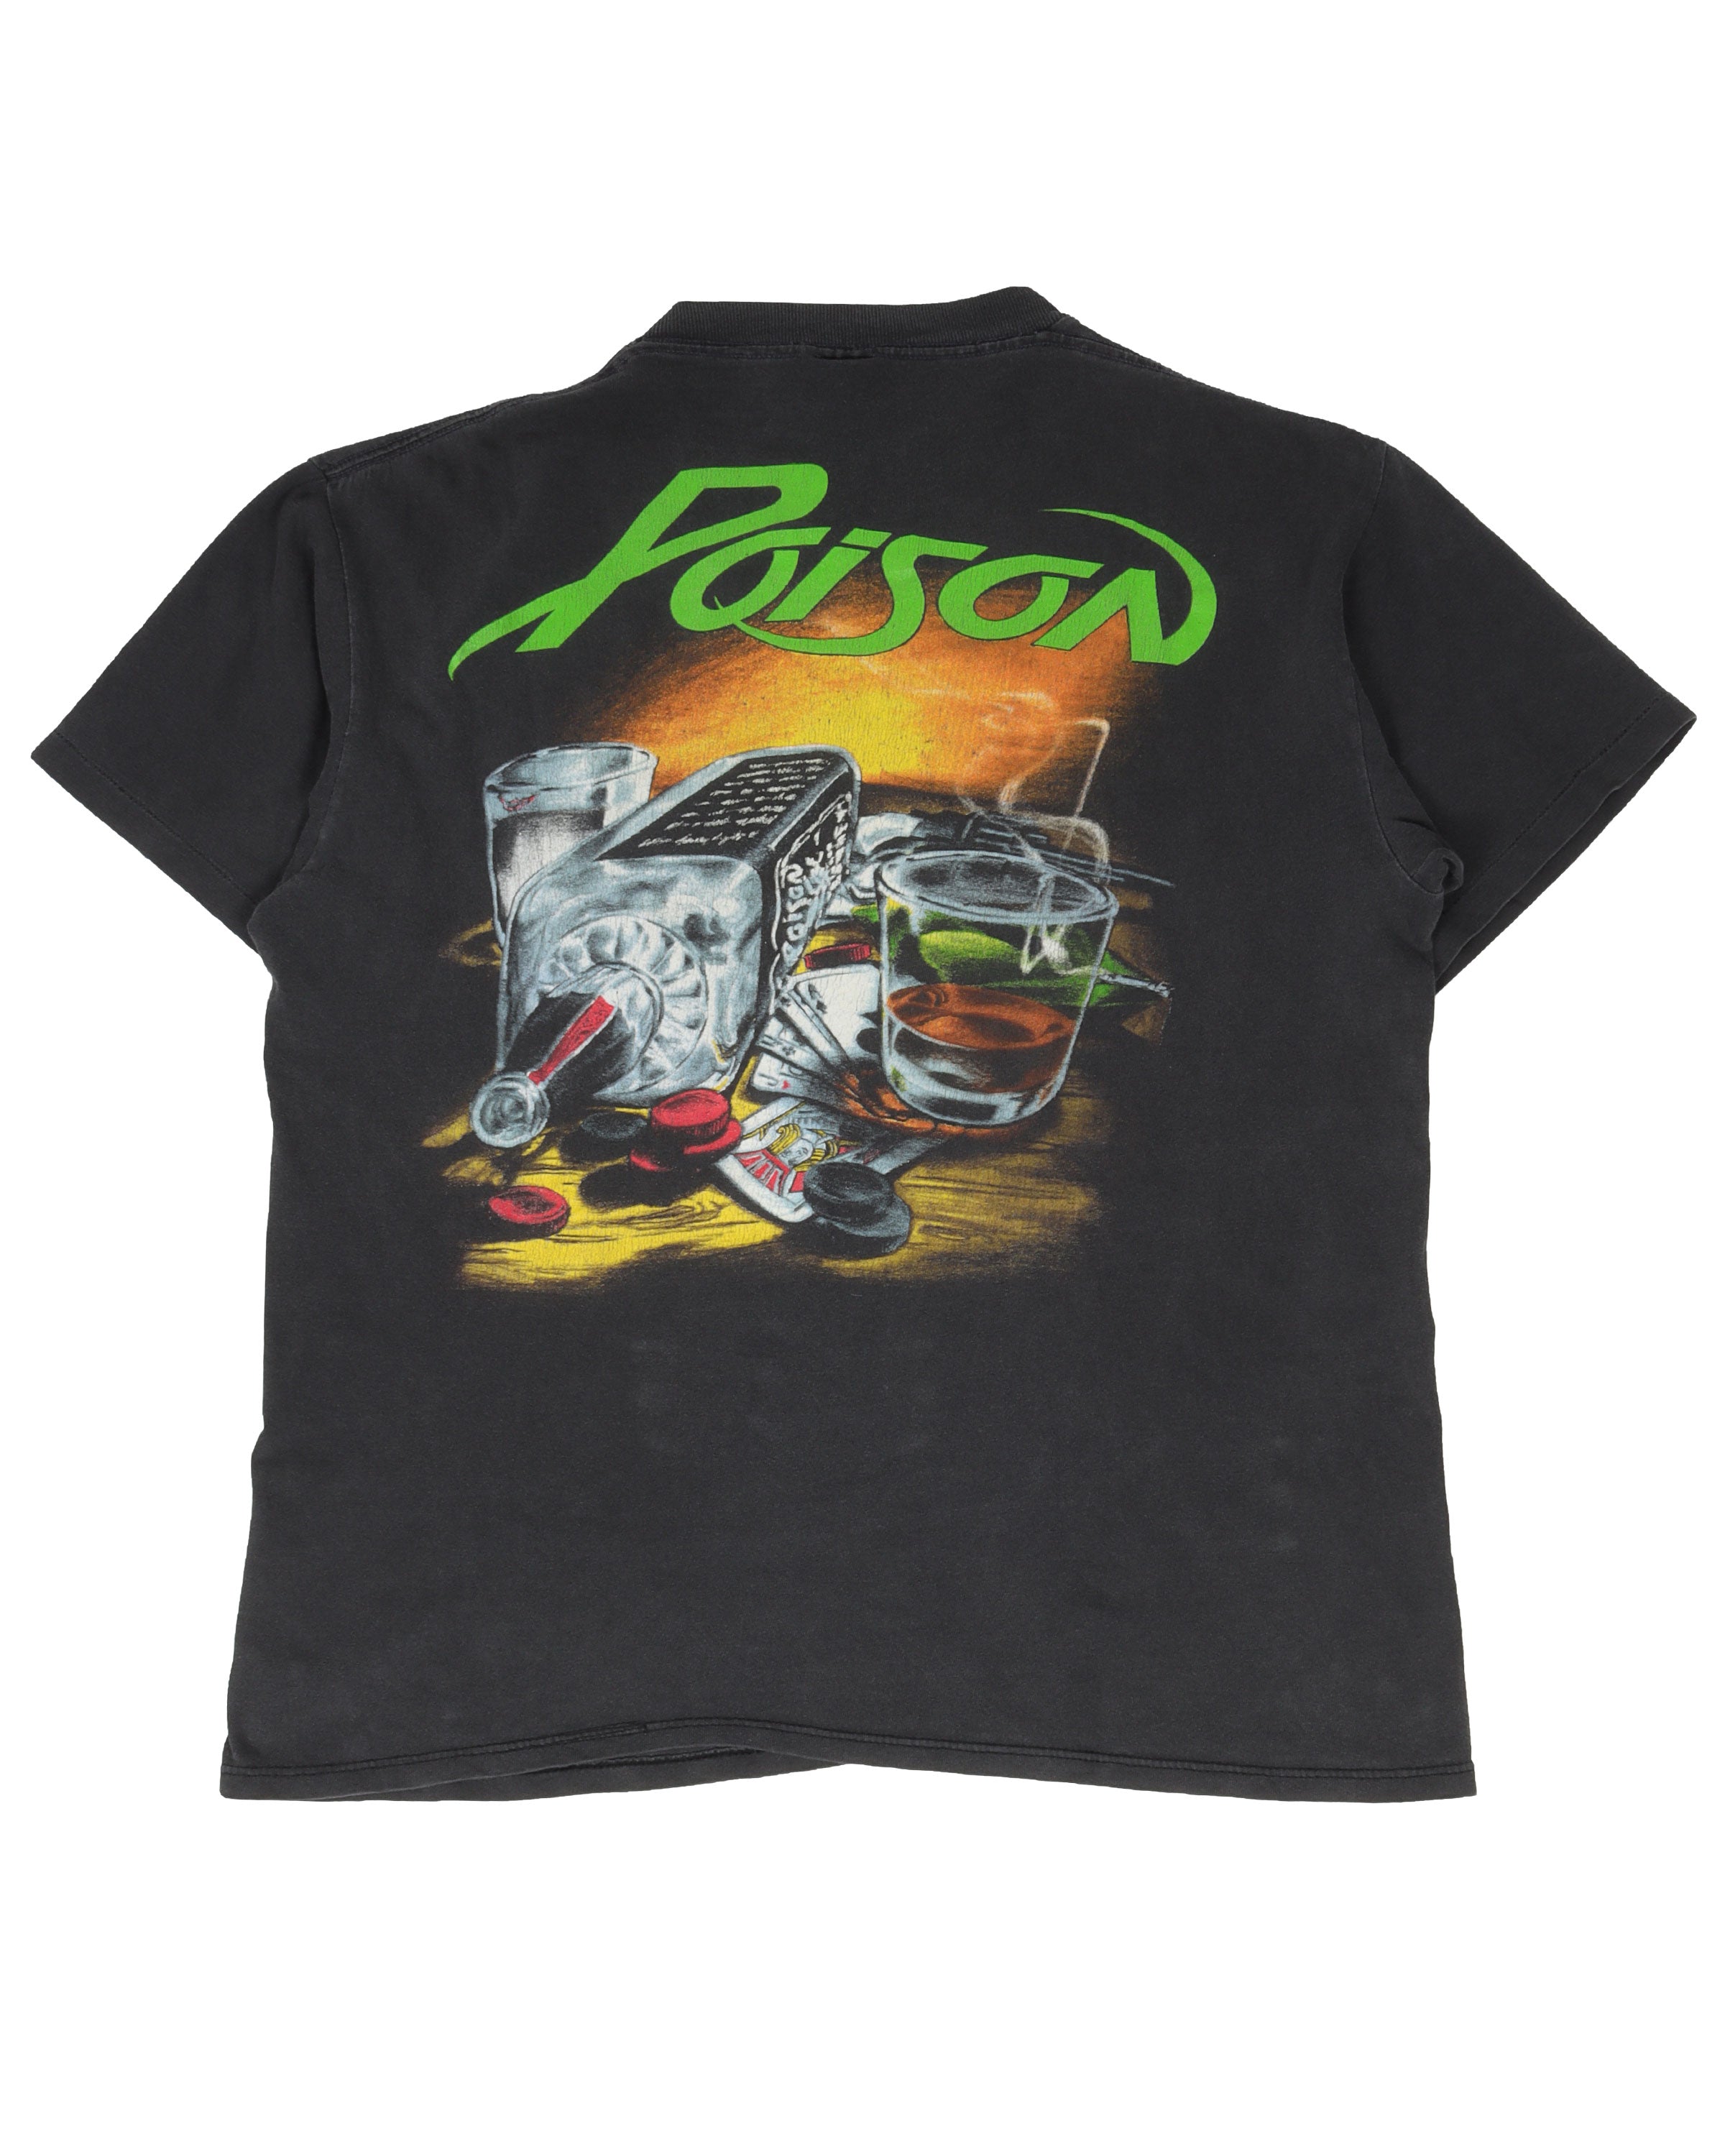 Poison "Nothing But a Good Time" T-Shirt